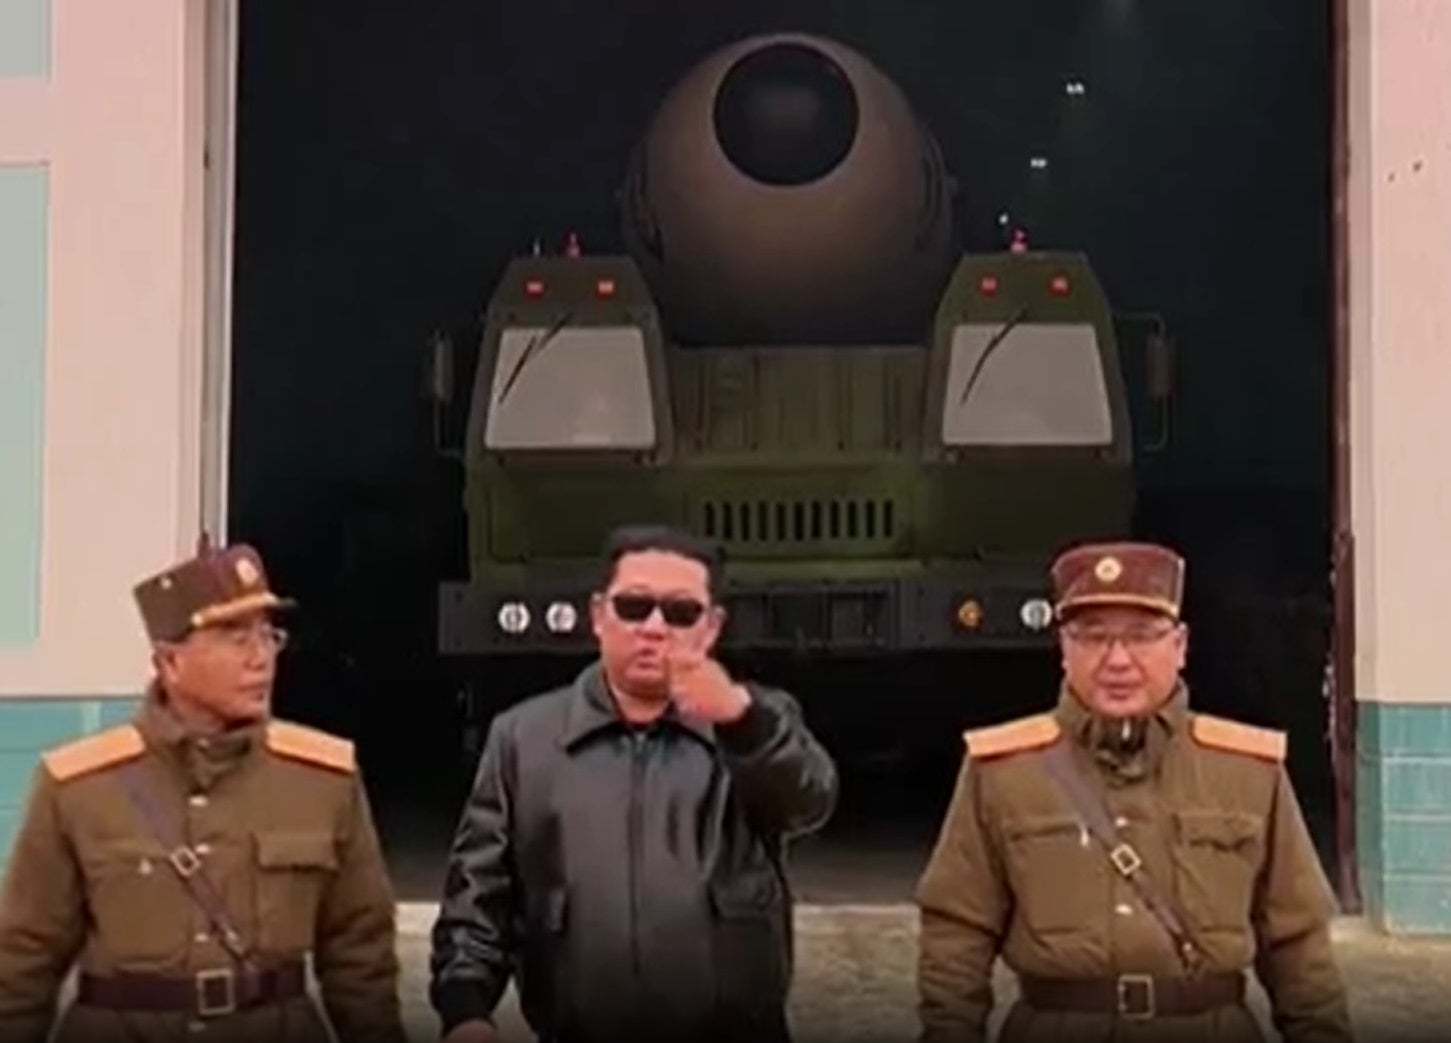 The Hwasong-17 missile is reportedly the biggest launched by North Korea to date